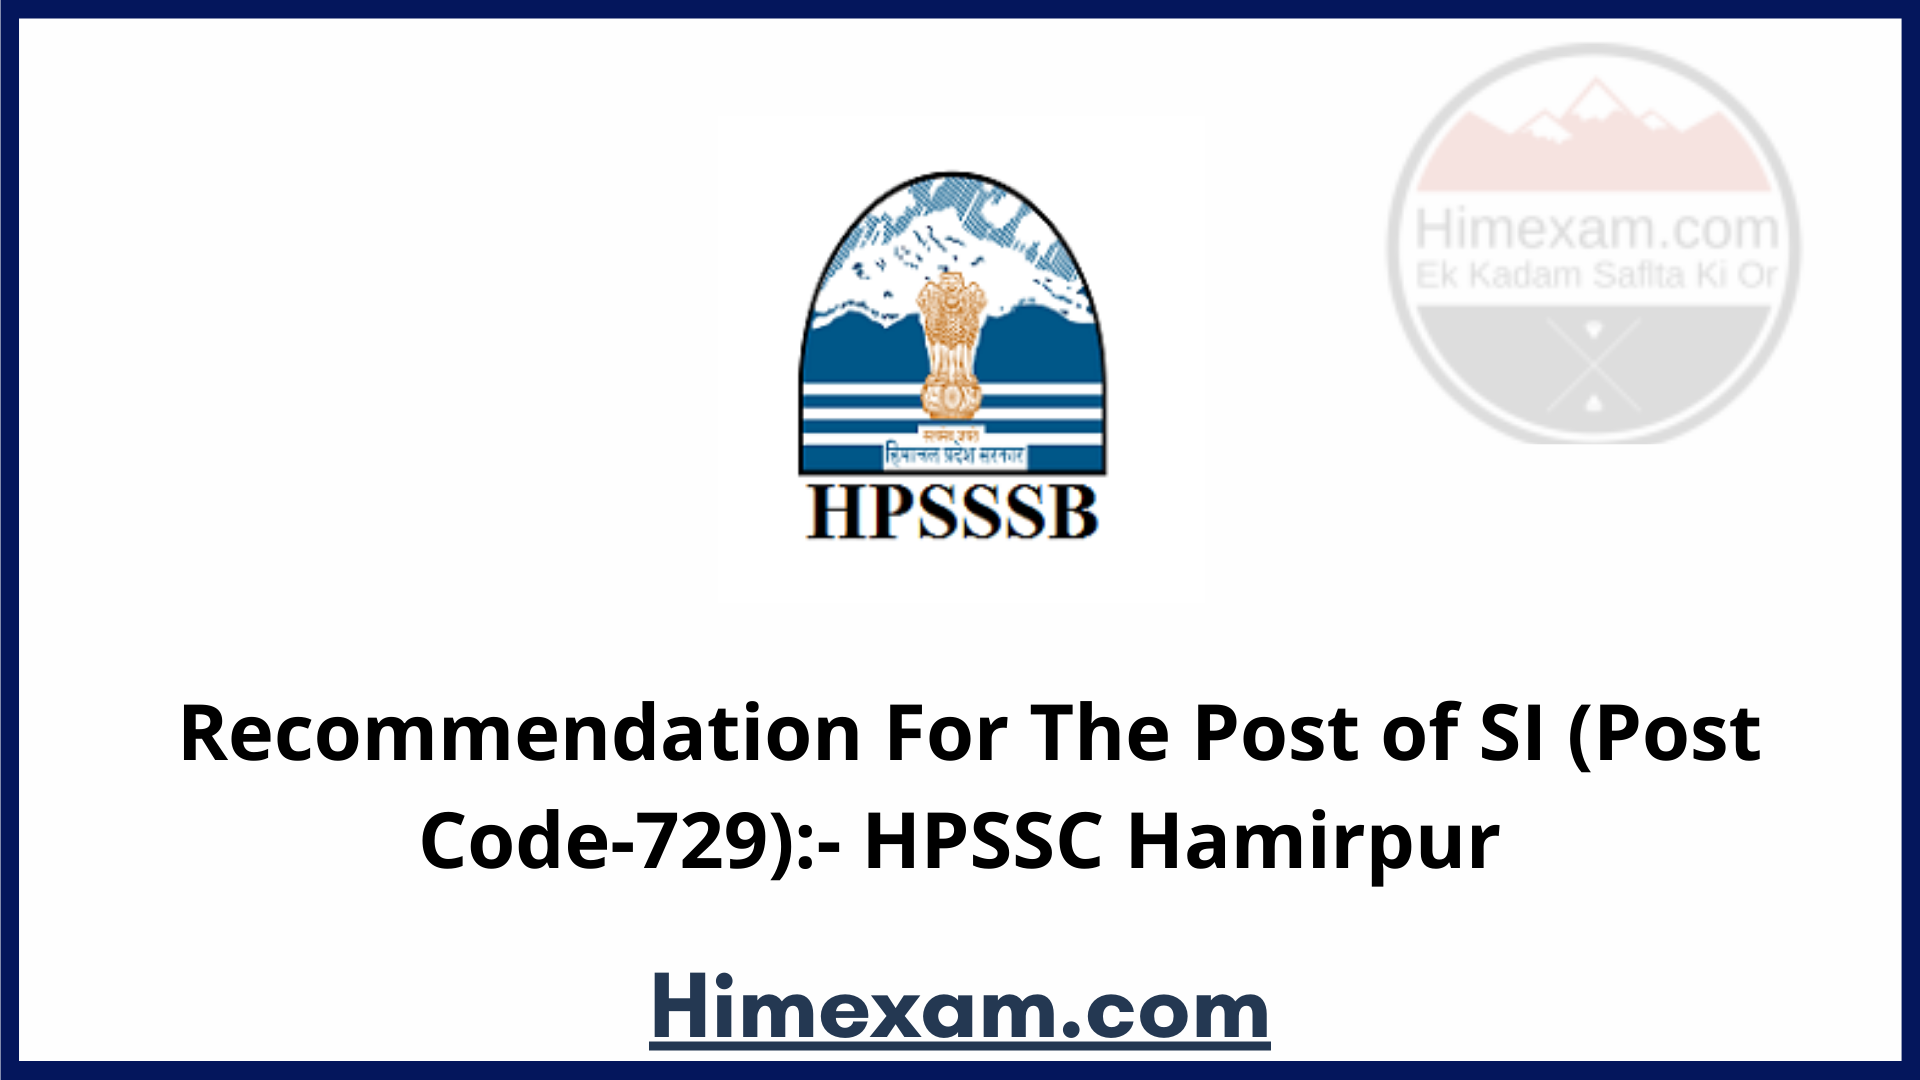 Recommendation For The Post of SI (Post Code-729):- HPSSC Hamirpur